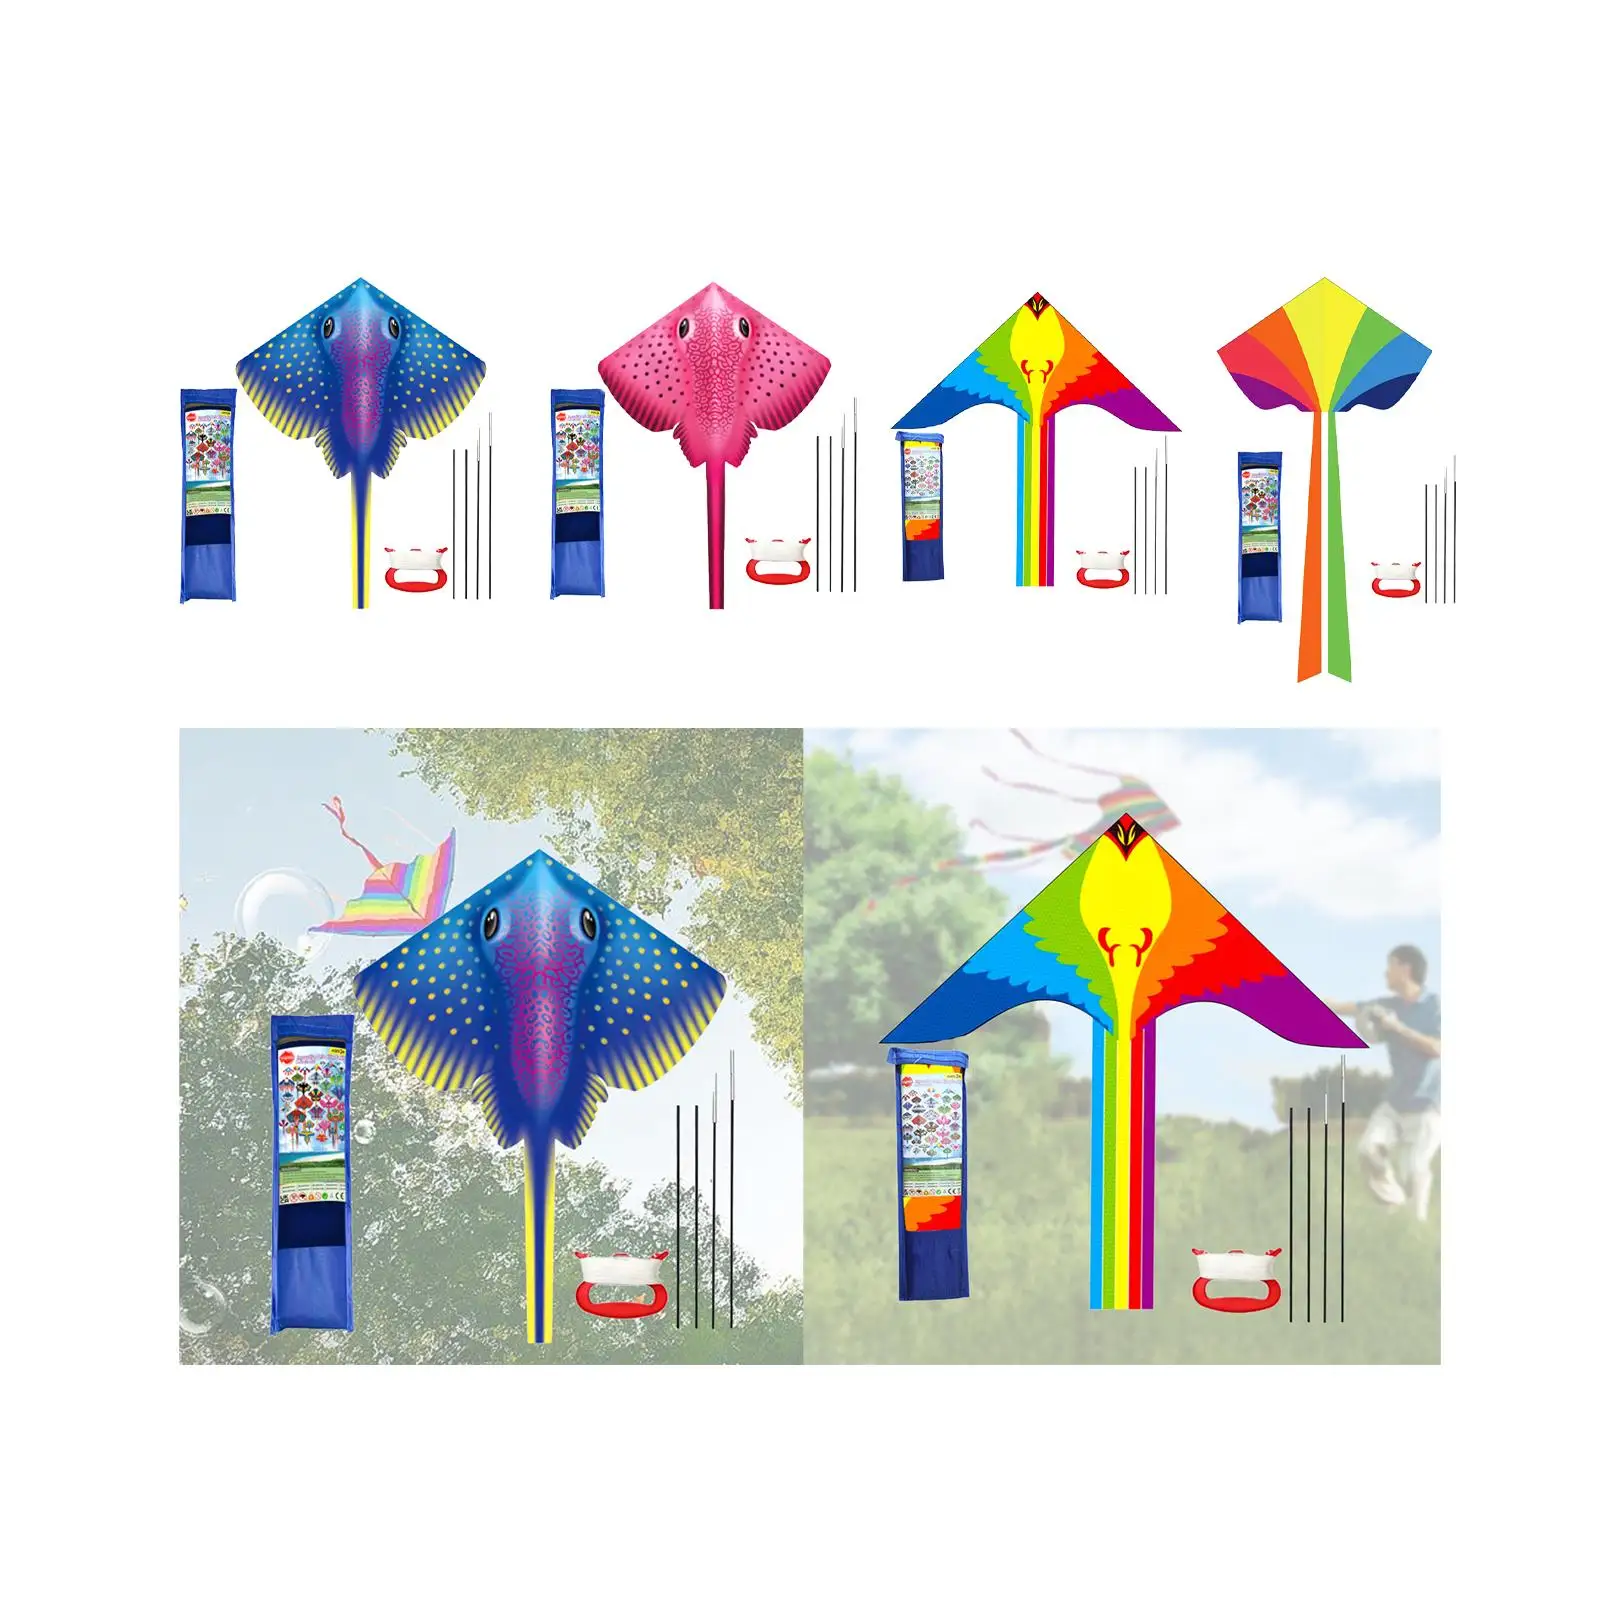 Huge Kite Novelty Stable Lightweight with Rope Animal Shape Durable Sports Kite for Festival Outdoor Game Lawn Travel Garden